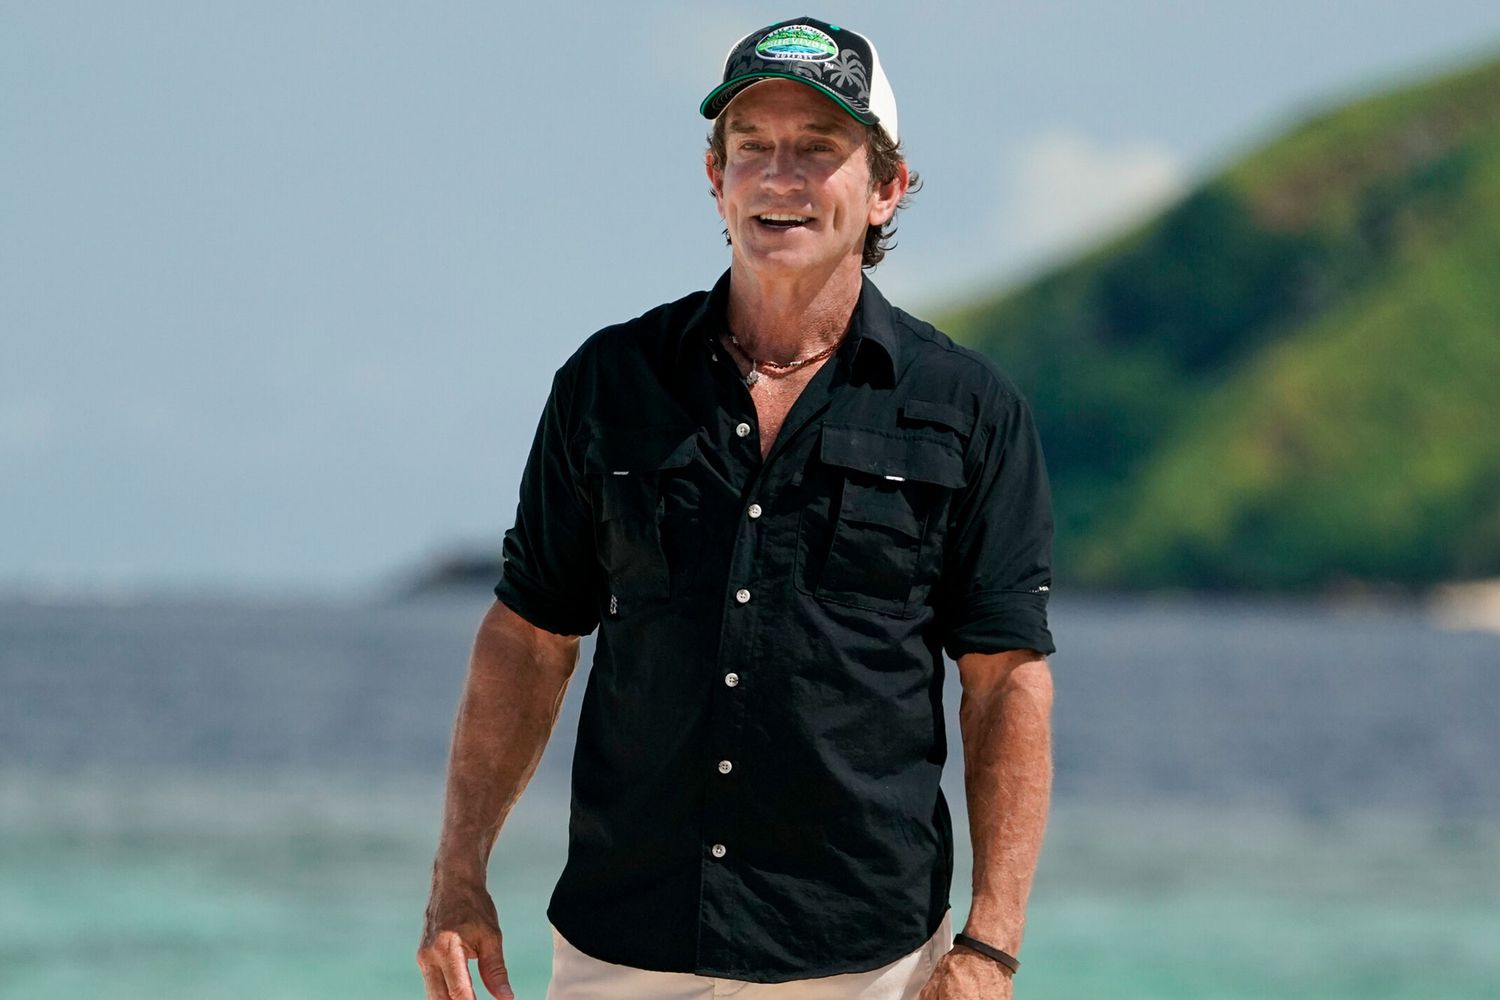 Jeff Probst says player outsmarted producers on 'Survivor' premiere